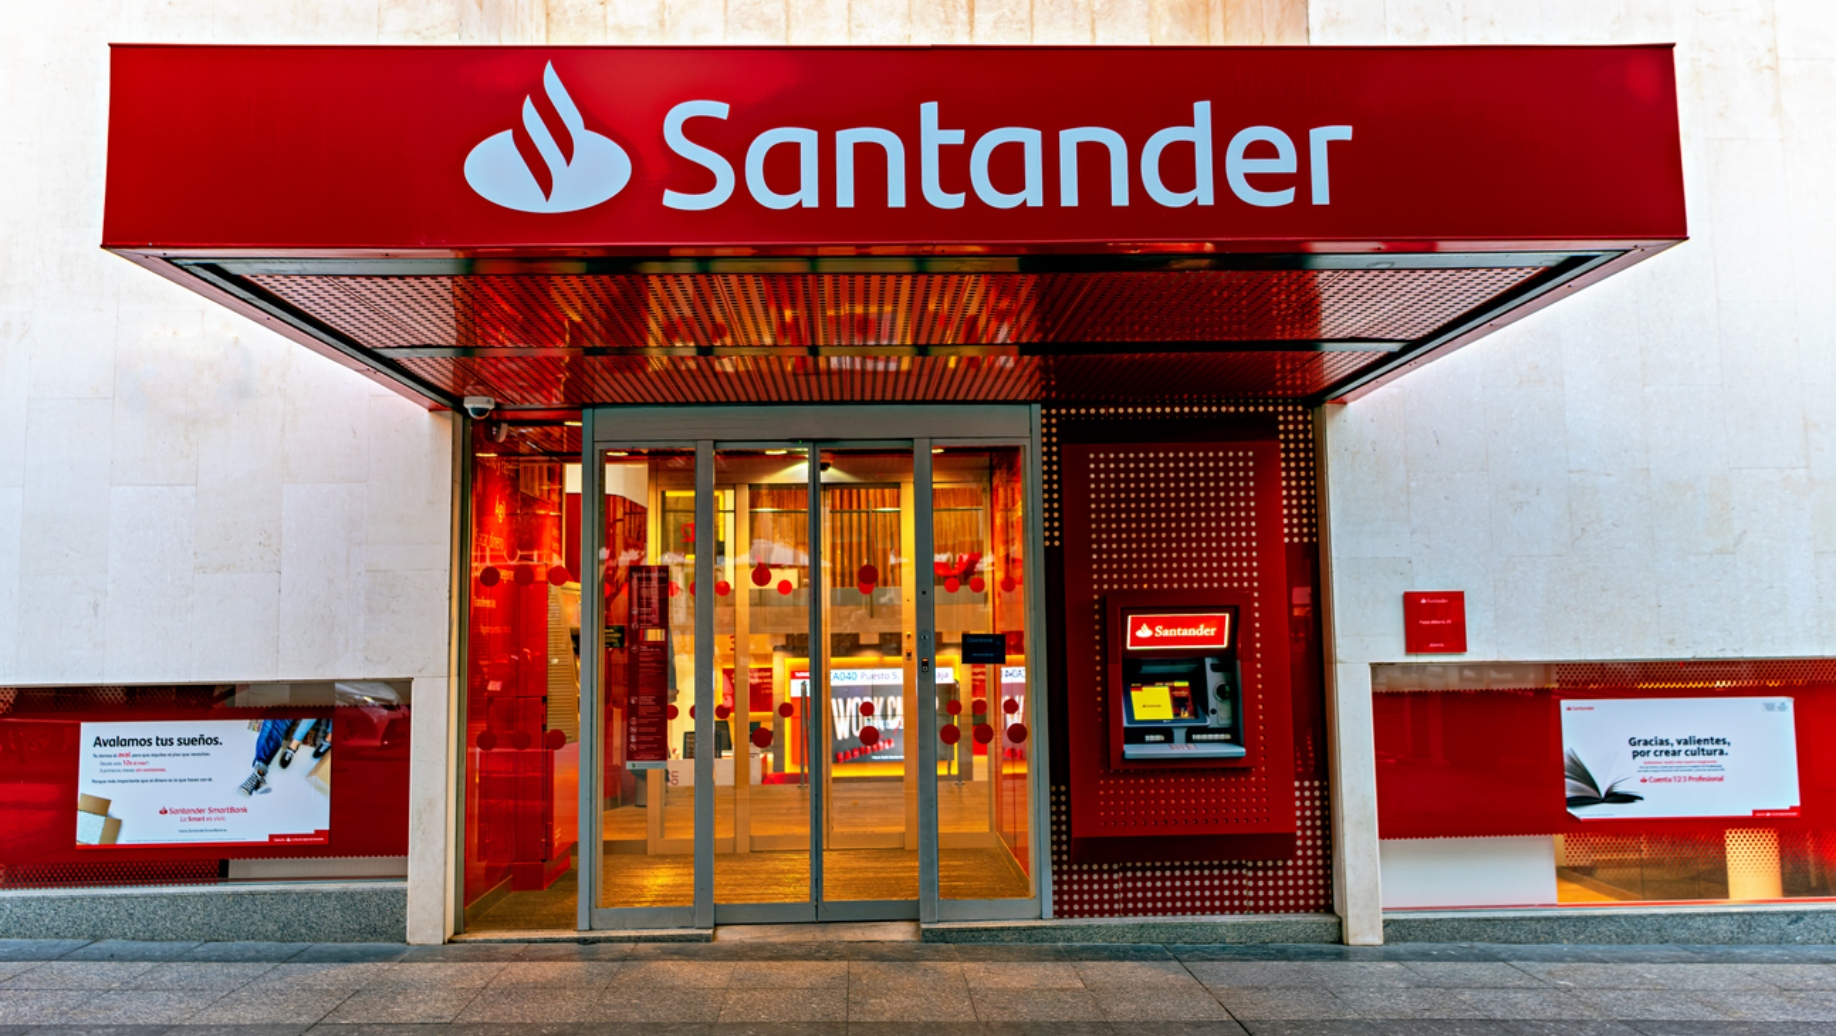 Santander launch new current account offering up to £15 cashback per month